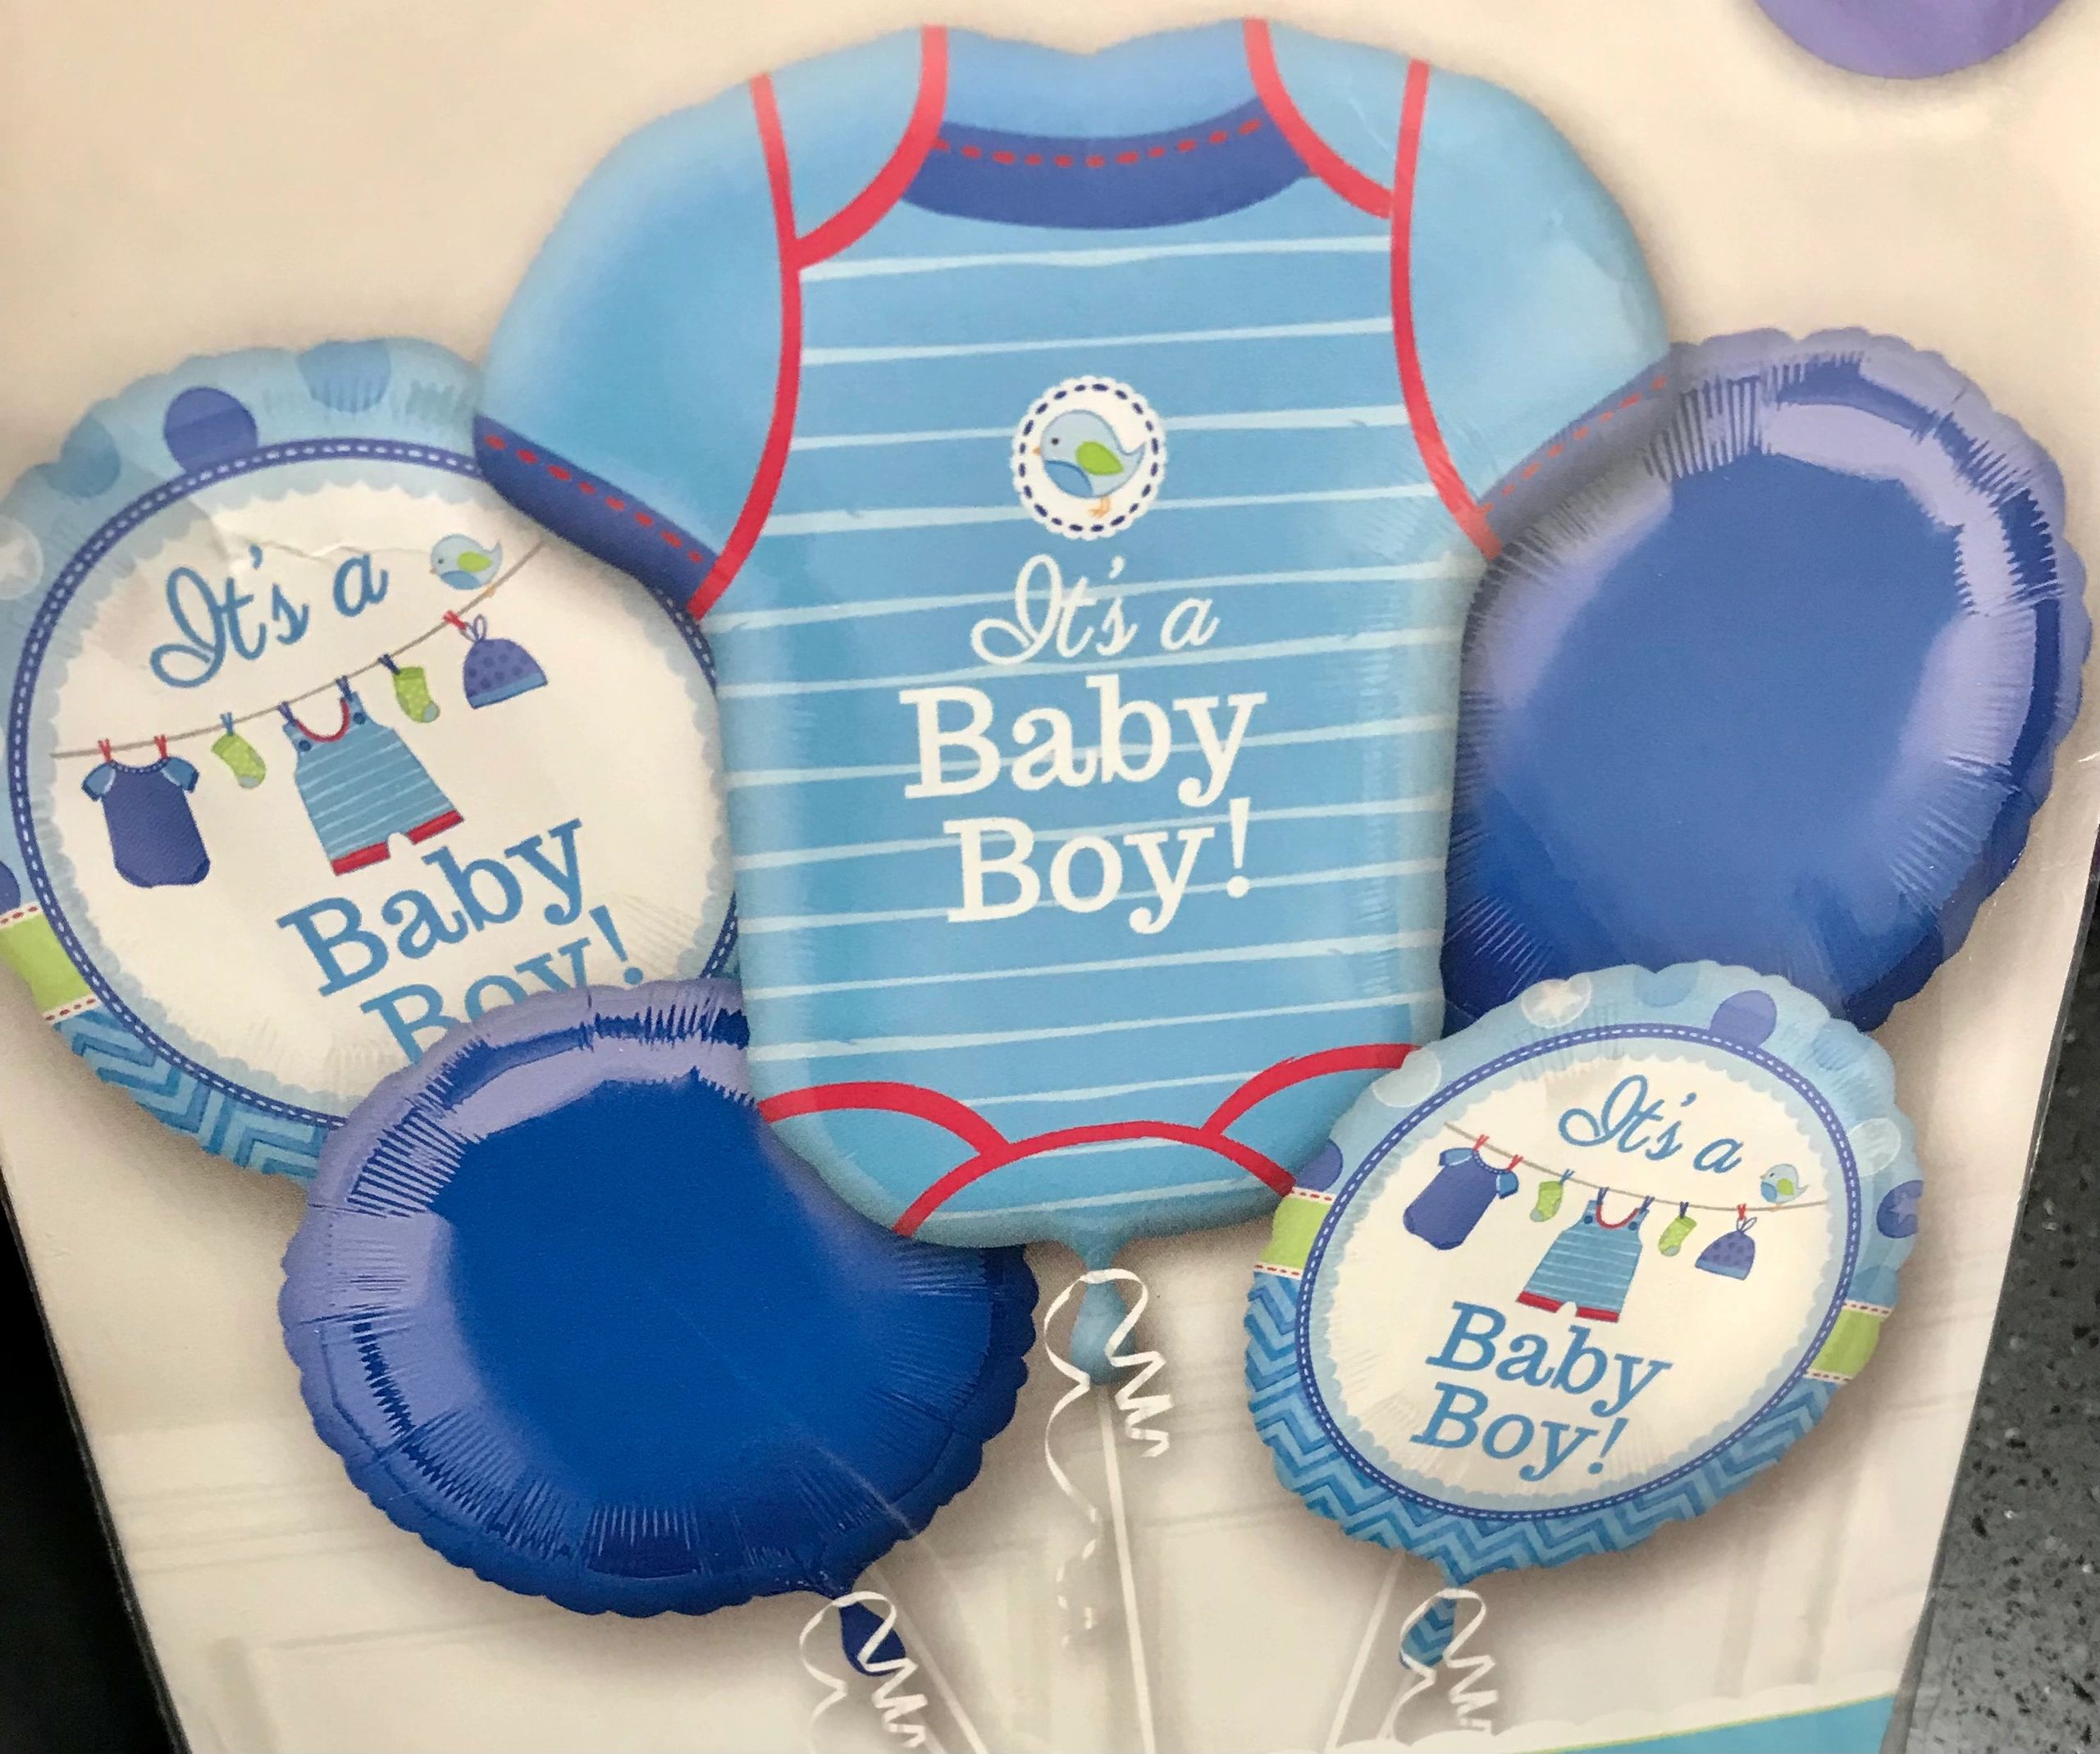 Canberra balloons, baby boy balloons, baby shower, Its a boy balloons